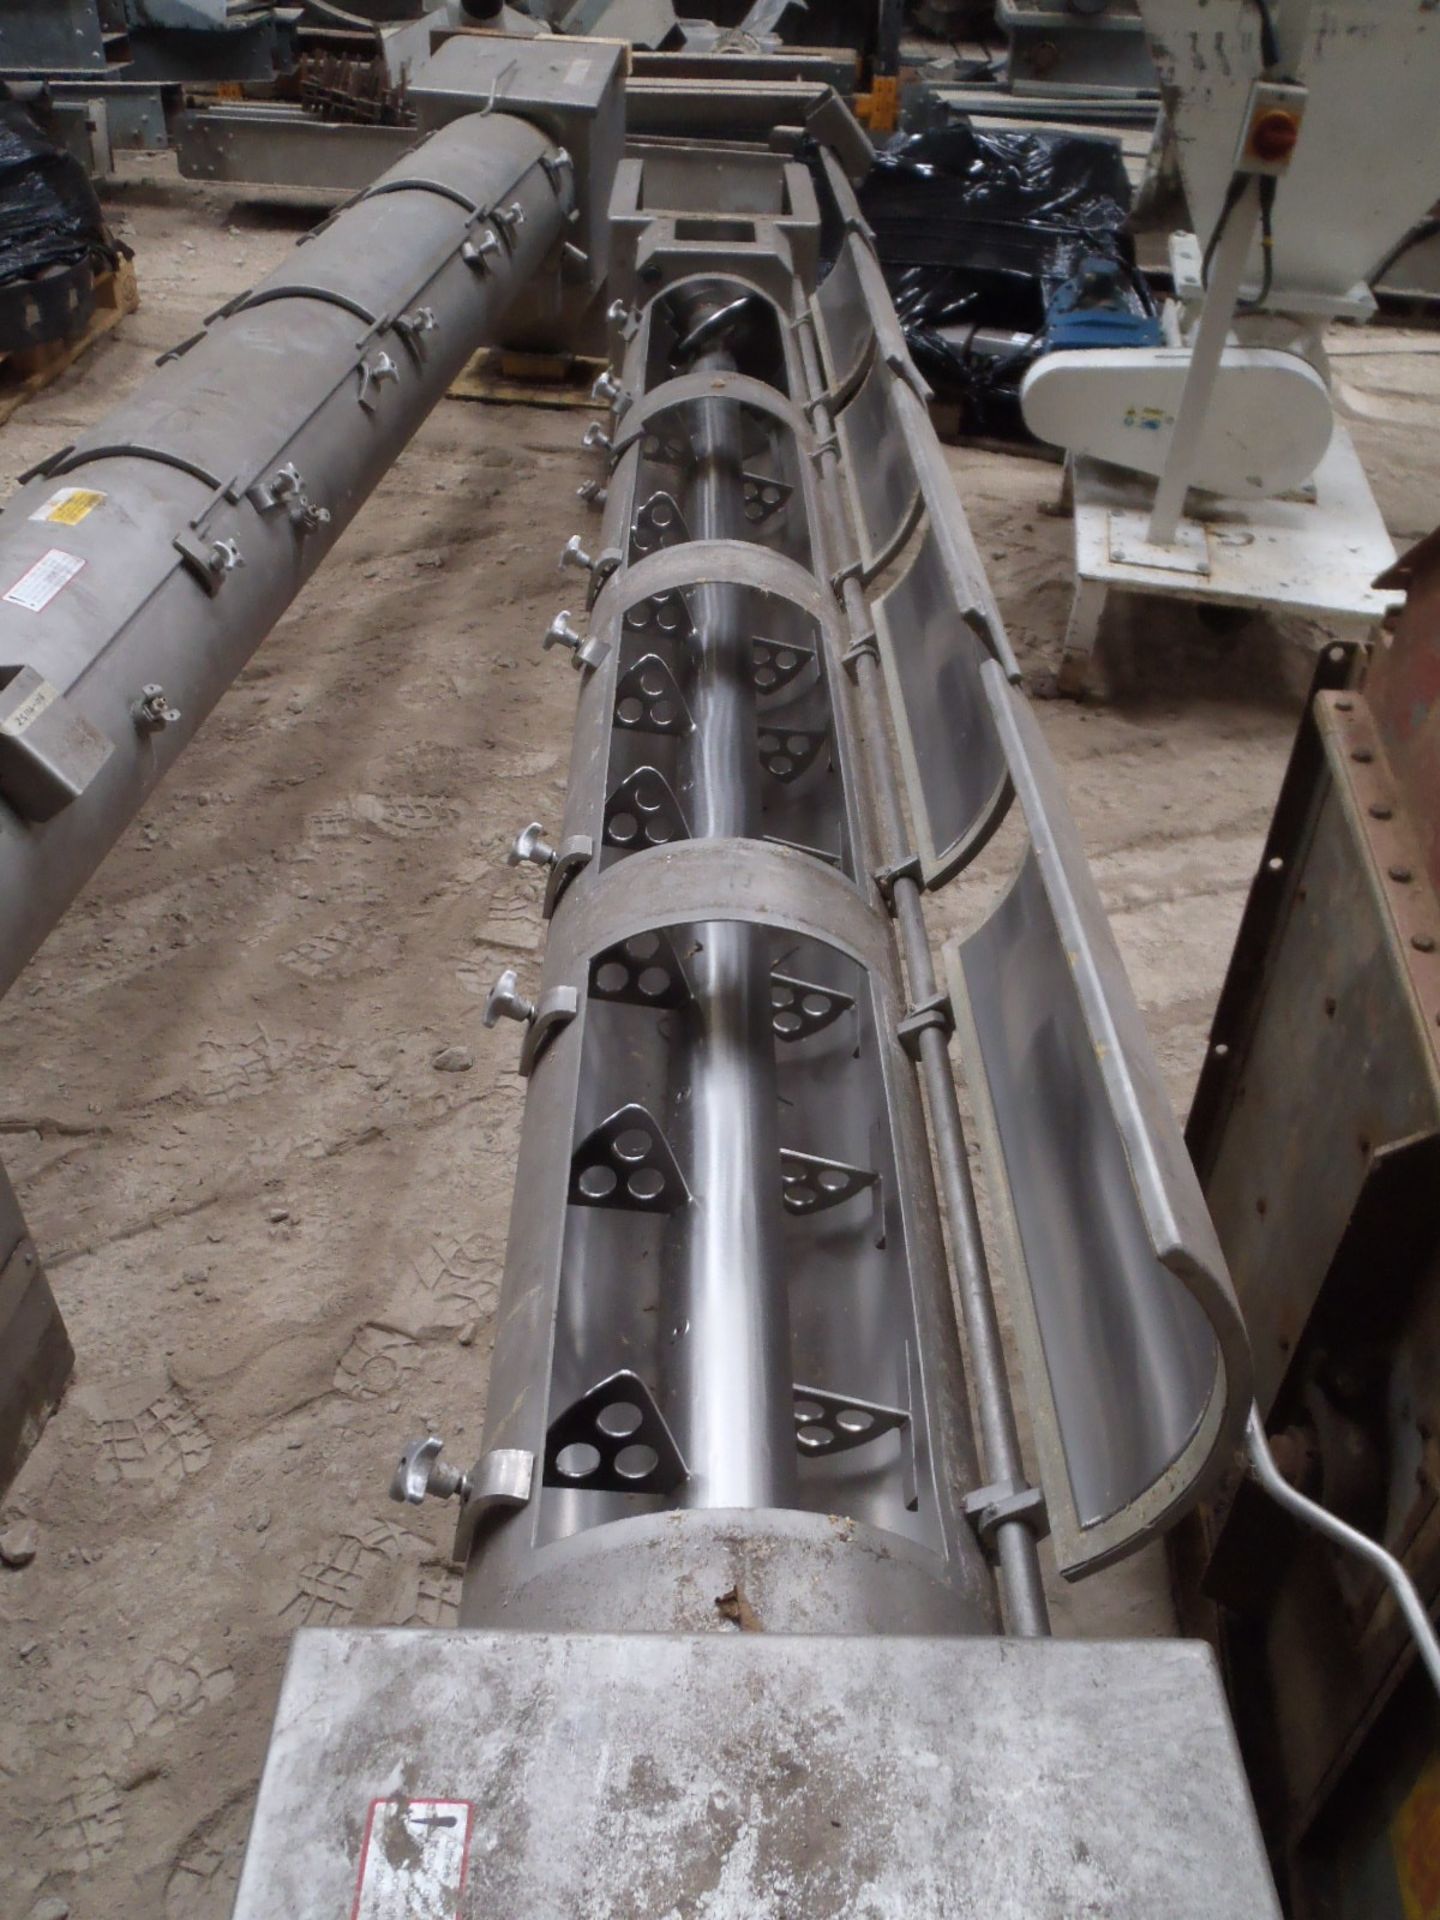 Buhler Condimat Stainless Steel Screw Conveyor, approx. 300mm dia. x 3m long, loading free of charge - Image 2 of 2